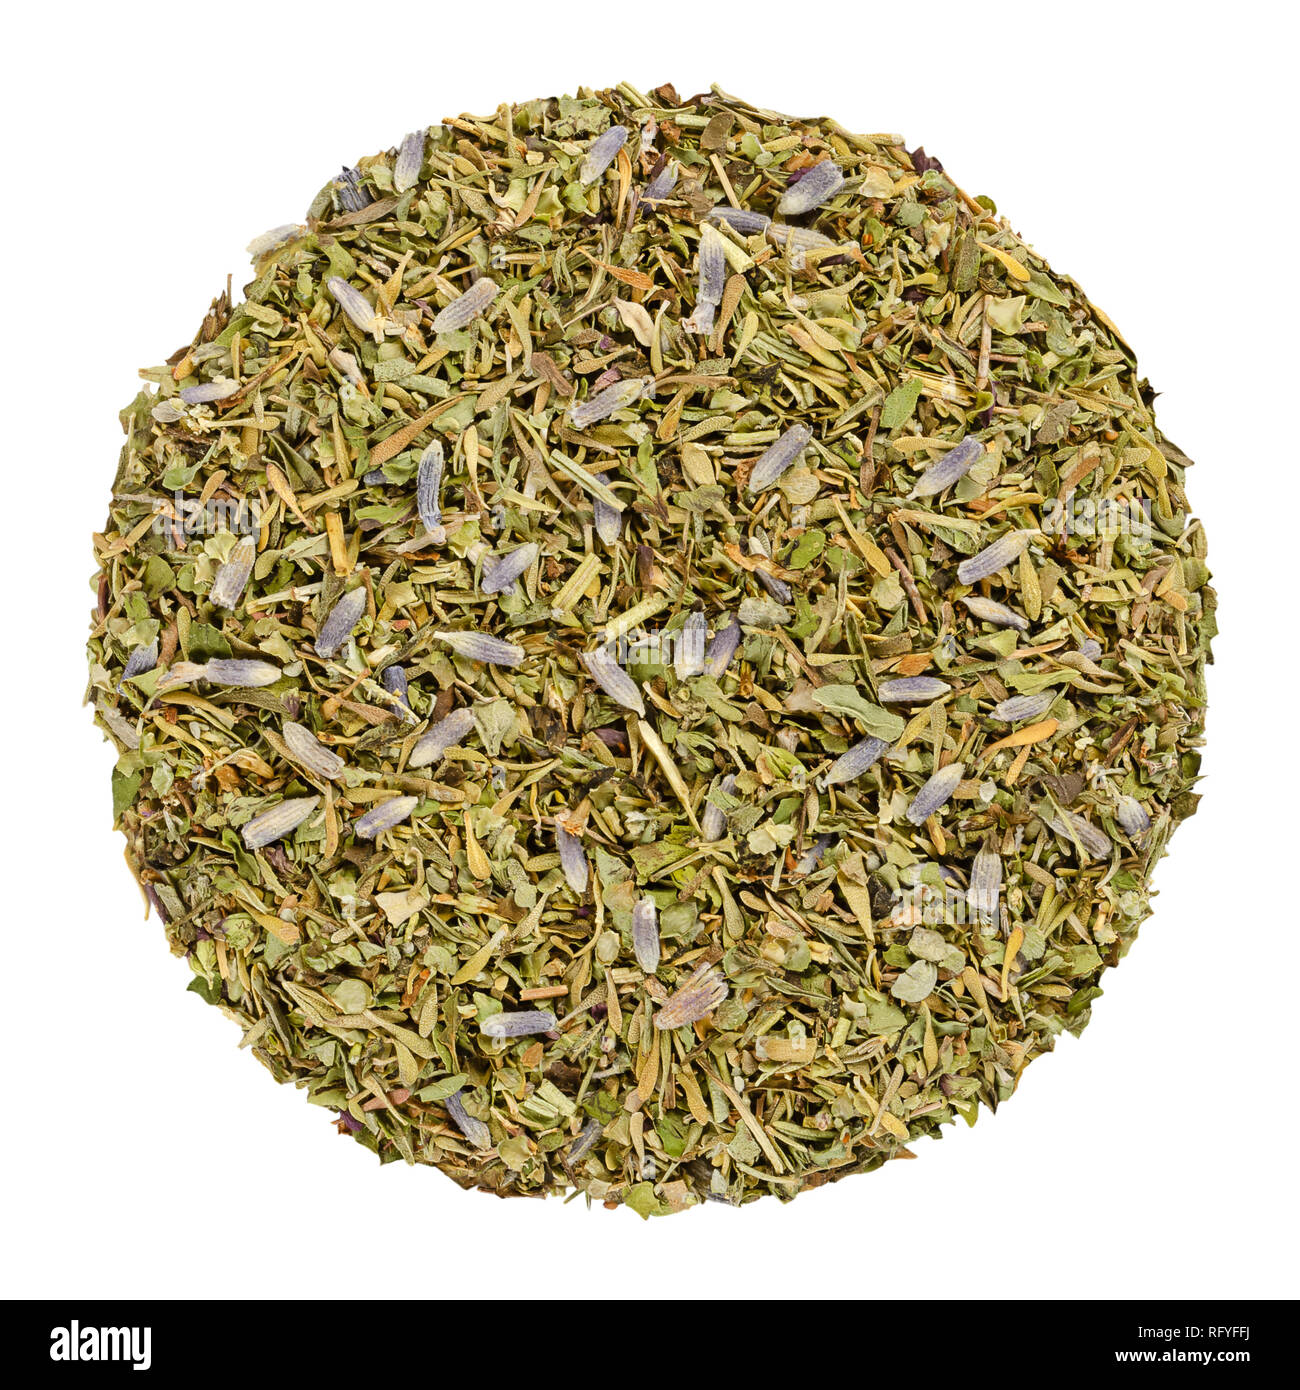 Dried Herbes de Provence, herb circle from above. Disc, made of herbs of the Provence, France. Savory, rosemary, thyme, lavender, oregano and marjoram. Stock Photo